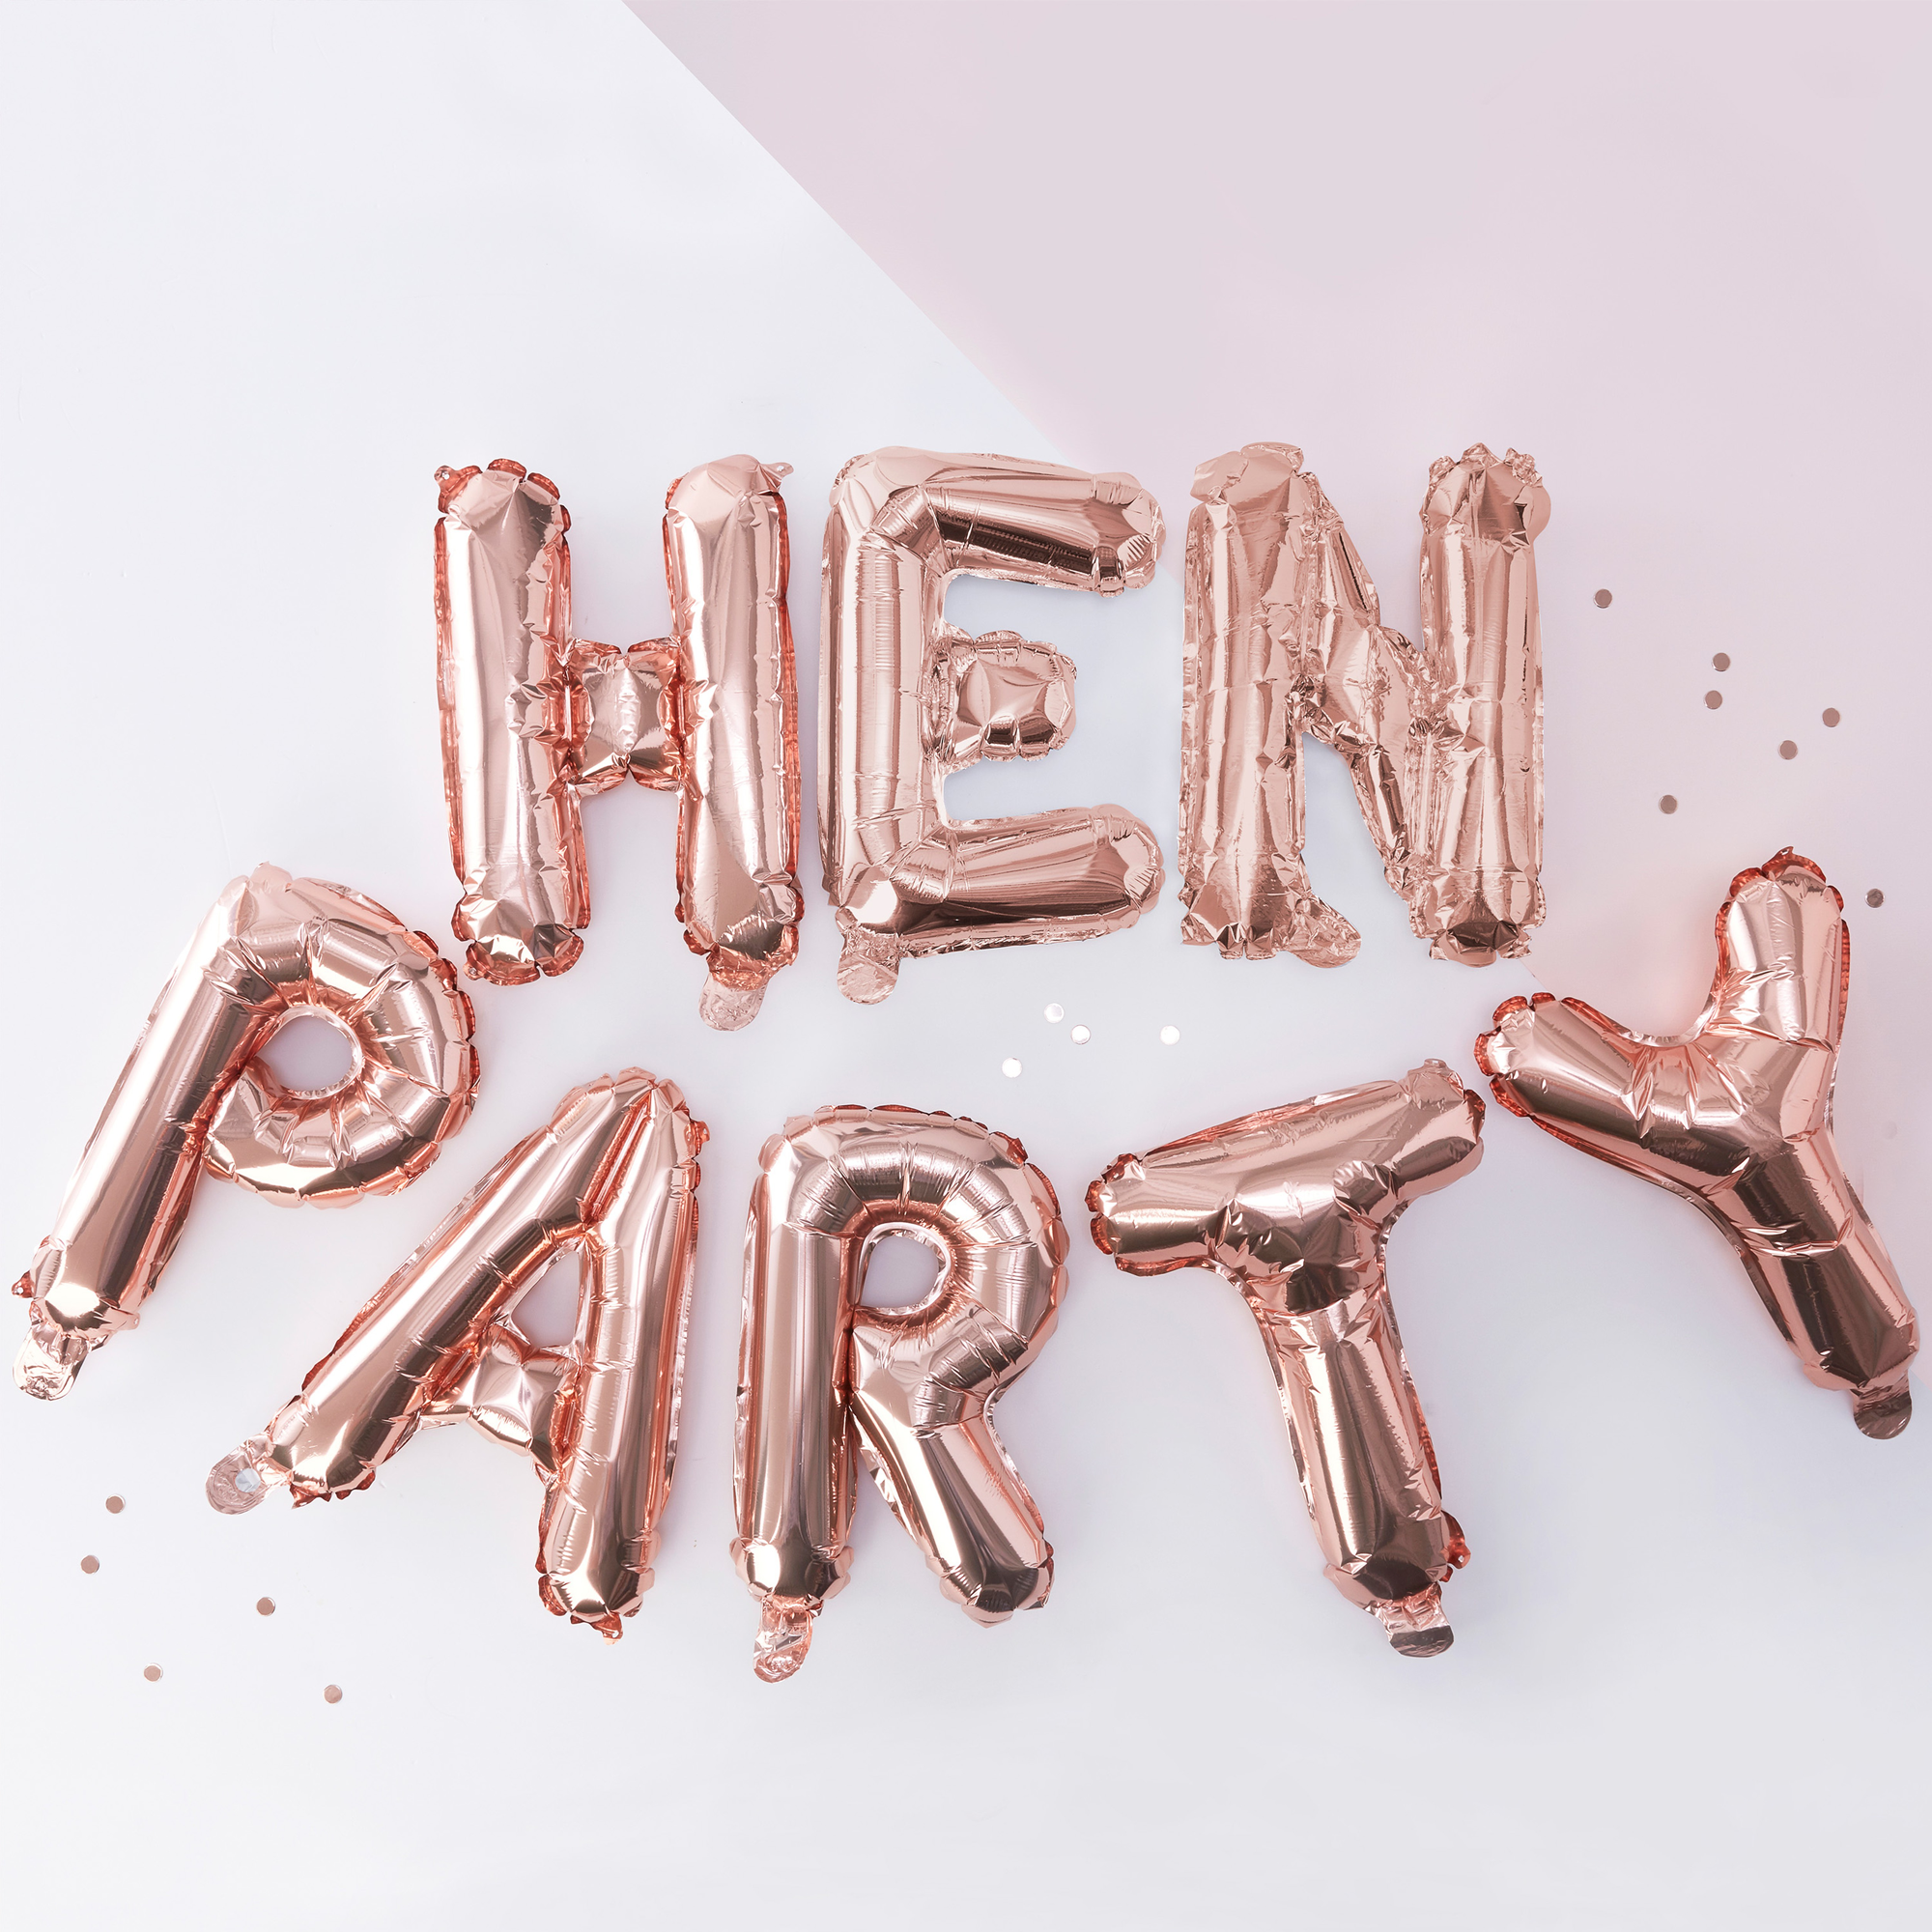 How To Create a Cheap Exciting Hen Party - Part 2